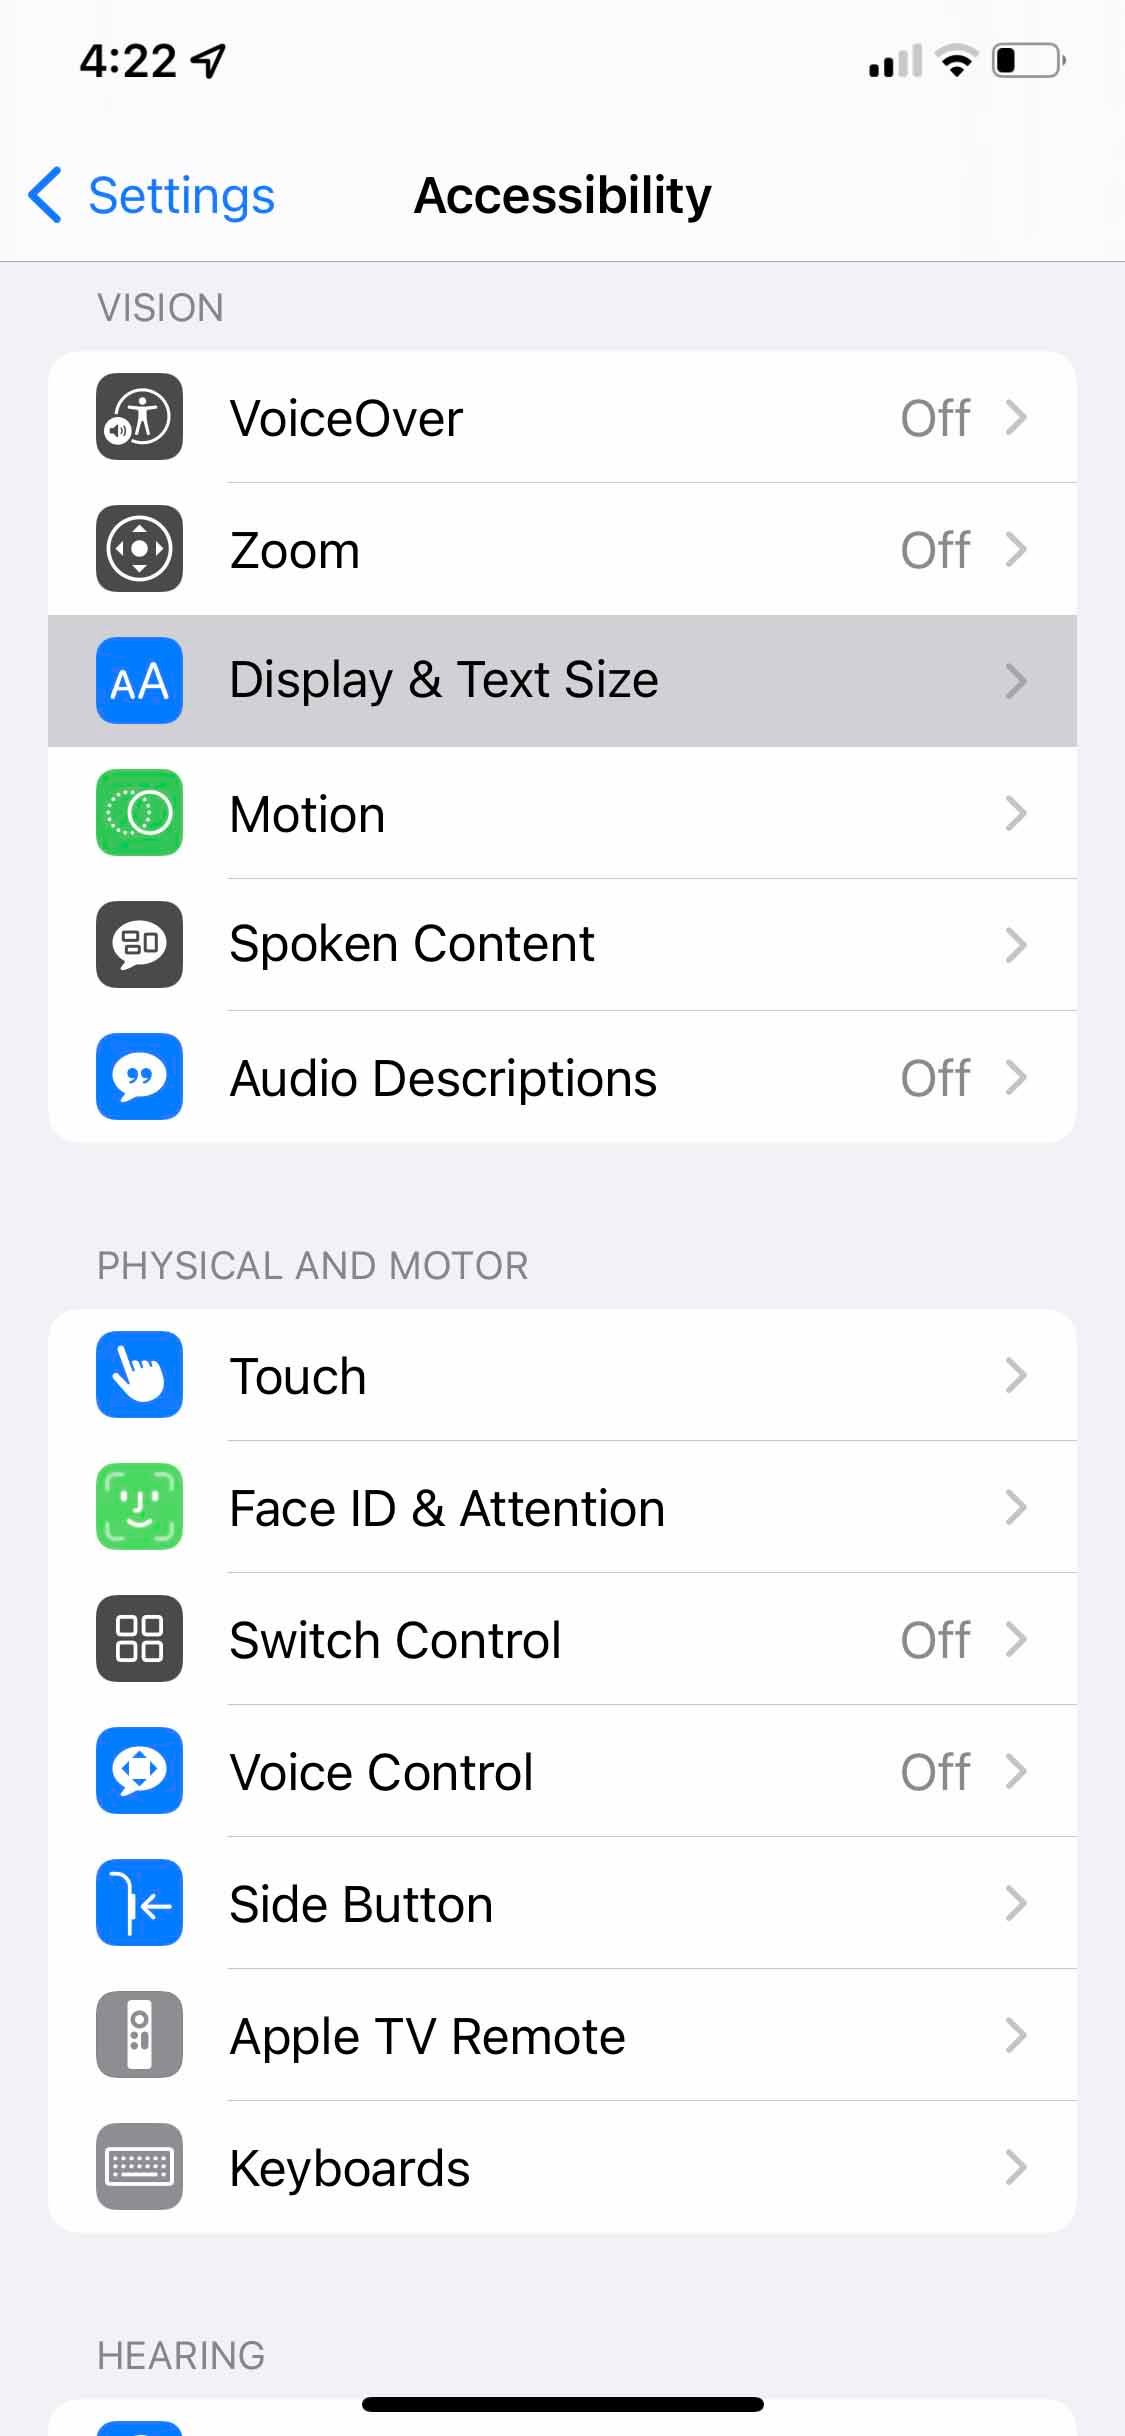 10 Reasons Why Your iPhone Automatically Dims the Screen